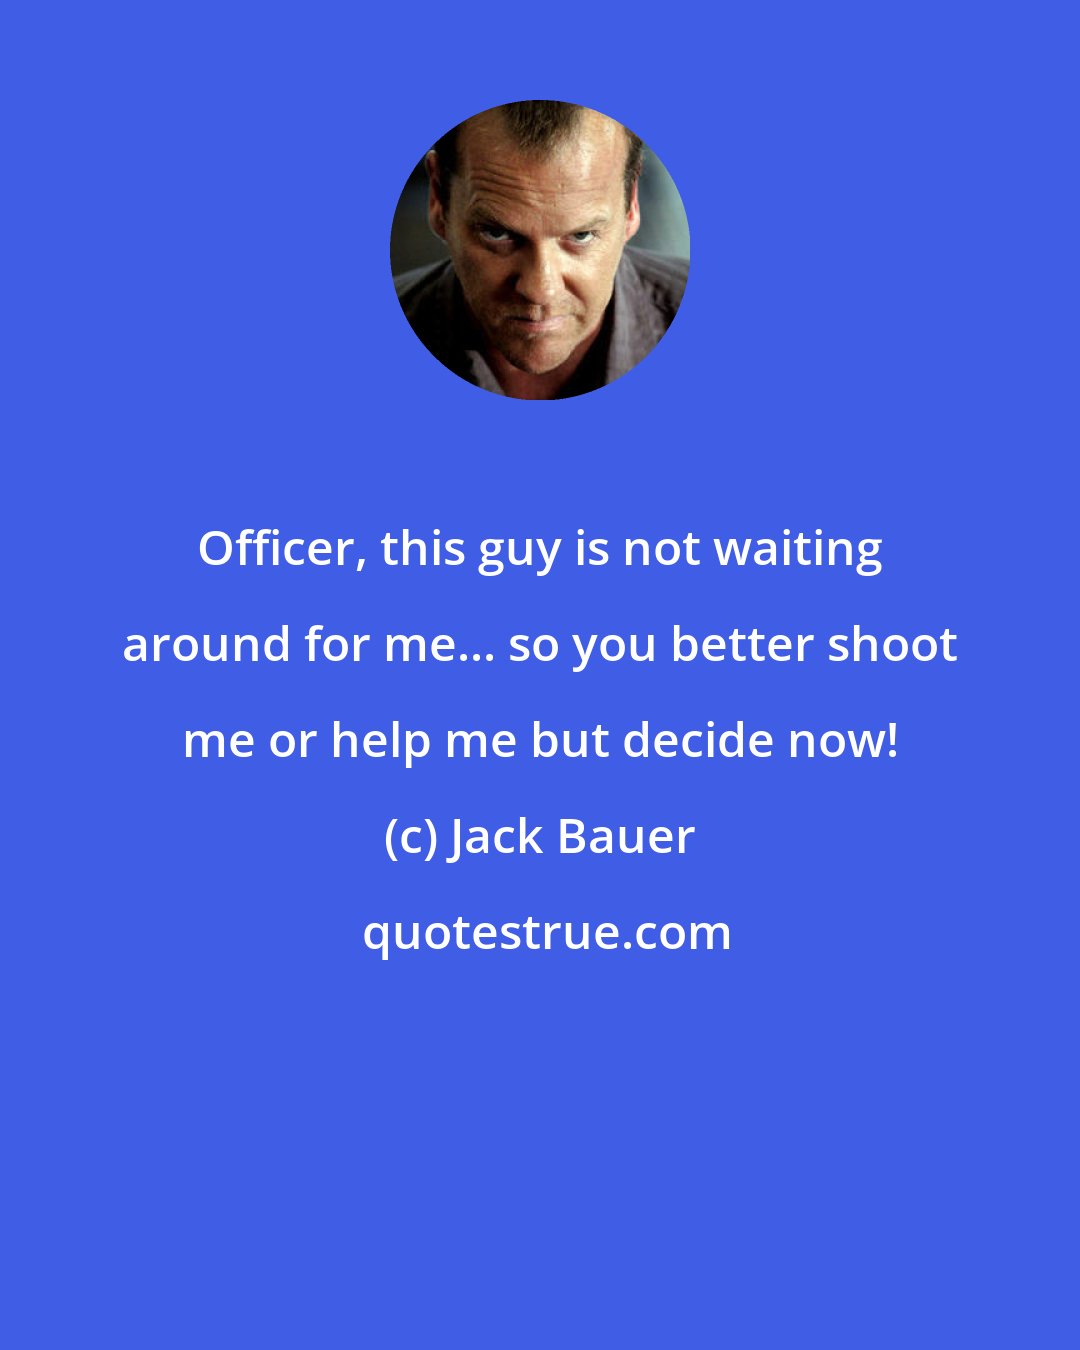 Jack Bauer: Officer, this guy is not waiting around for me... so you better shoot me or help me but decide now!